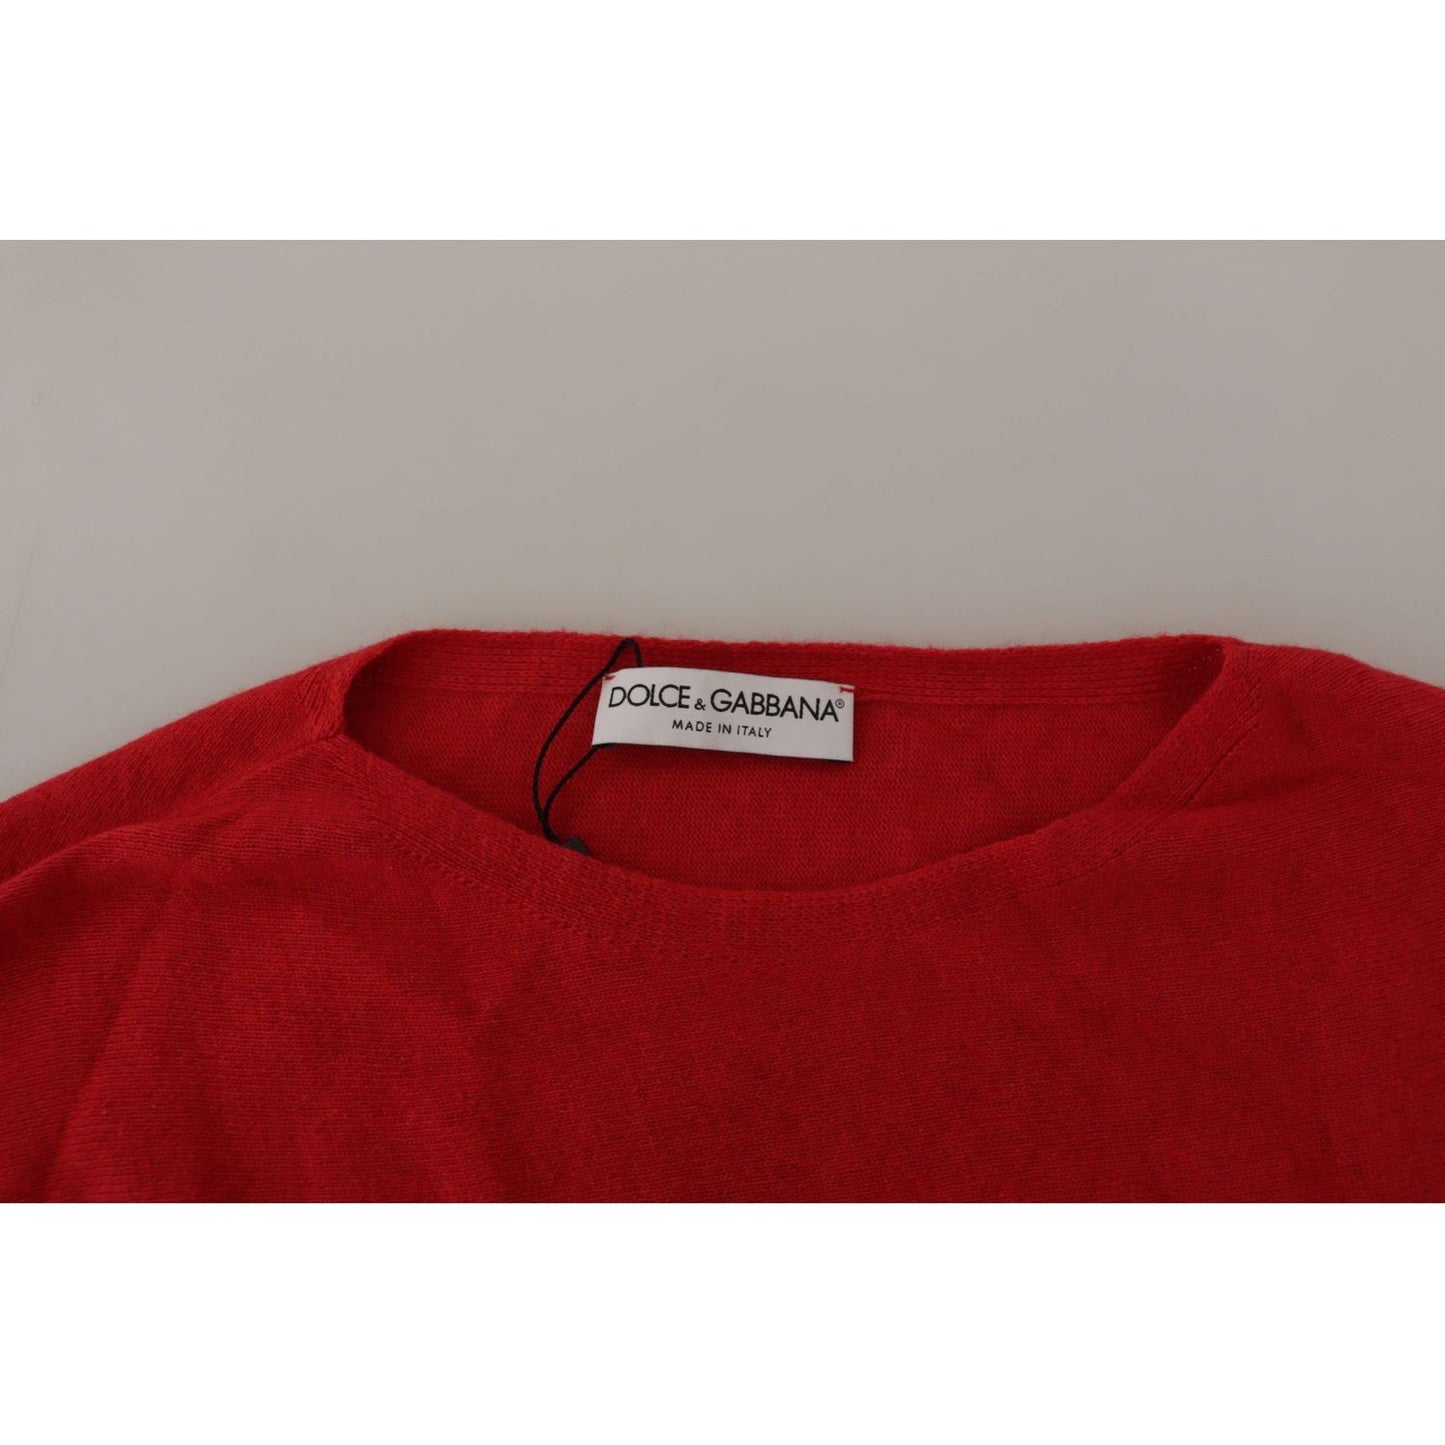 Dolce & Gabbana Elegant Red Wool Blend Knit Sweater red-wool-knit-round-neck-pullover-sweater